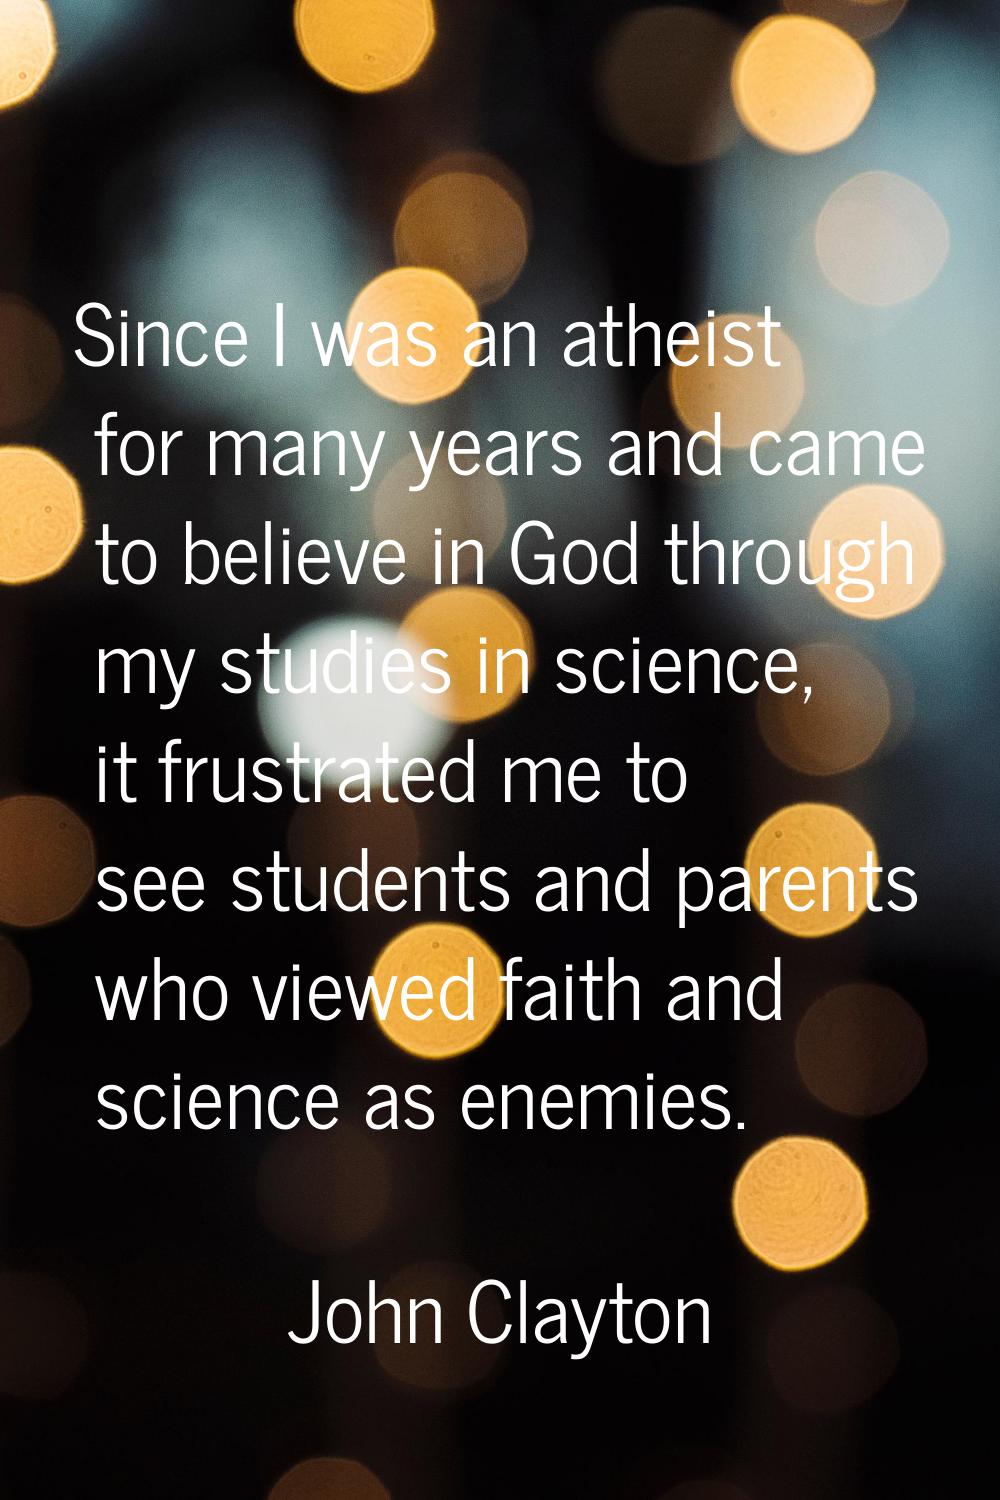 Since I was an atheist for many years and came to believe in God through my studies in science, it 